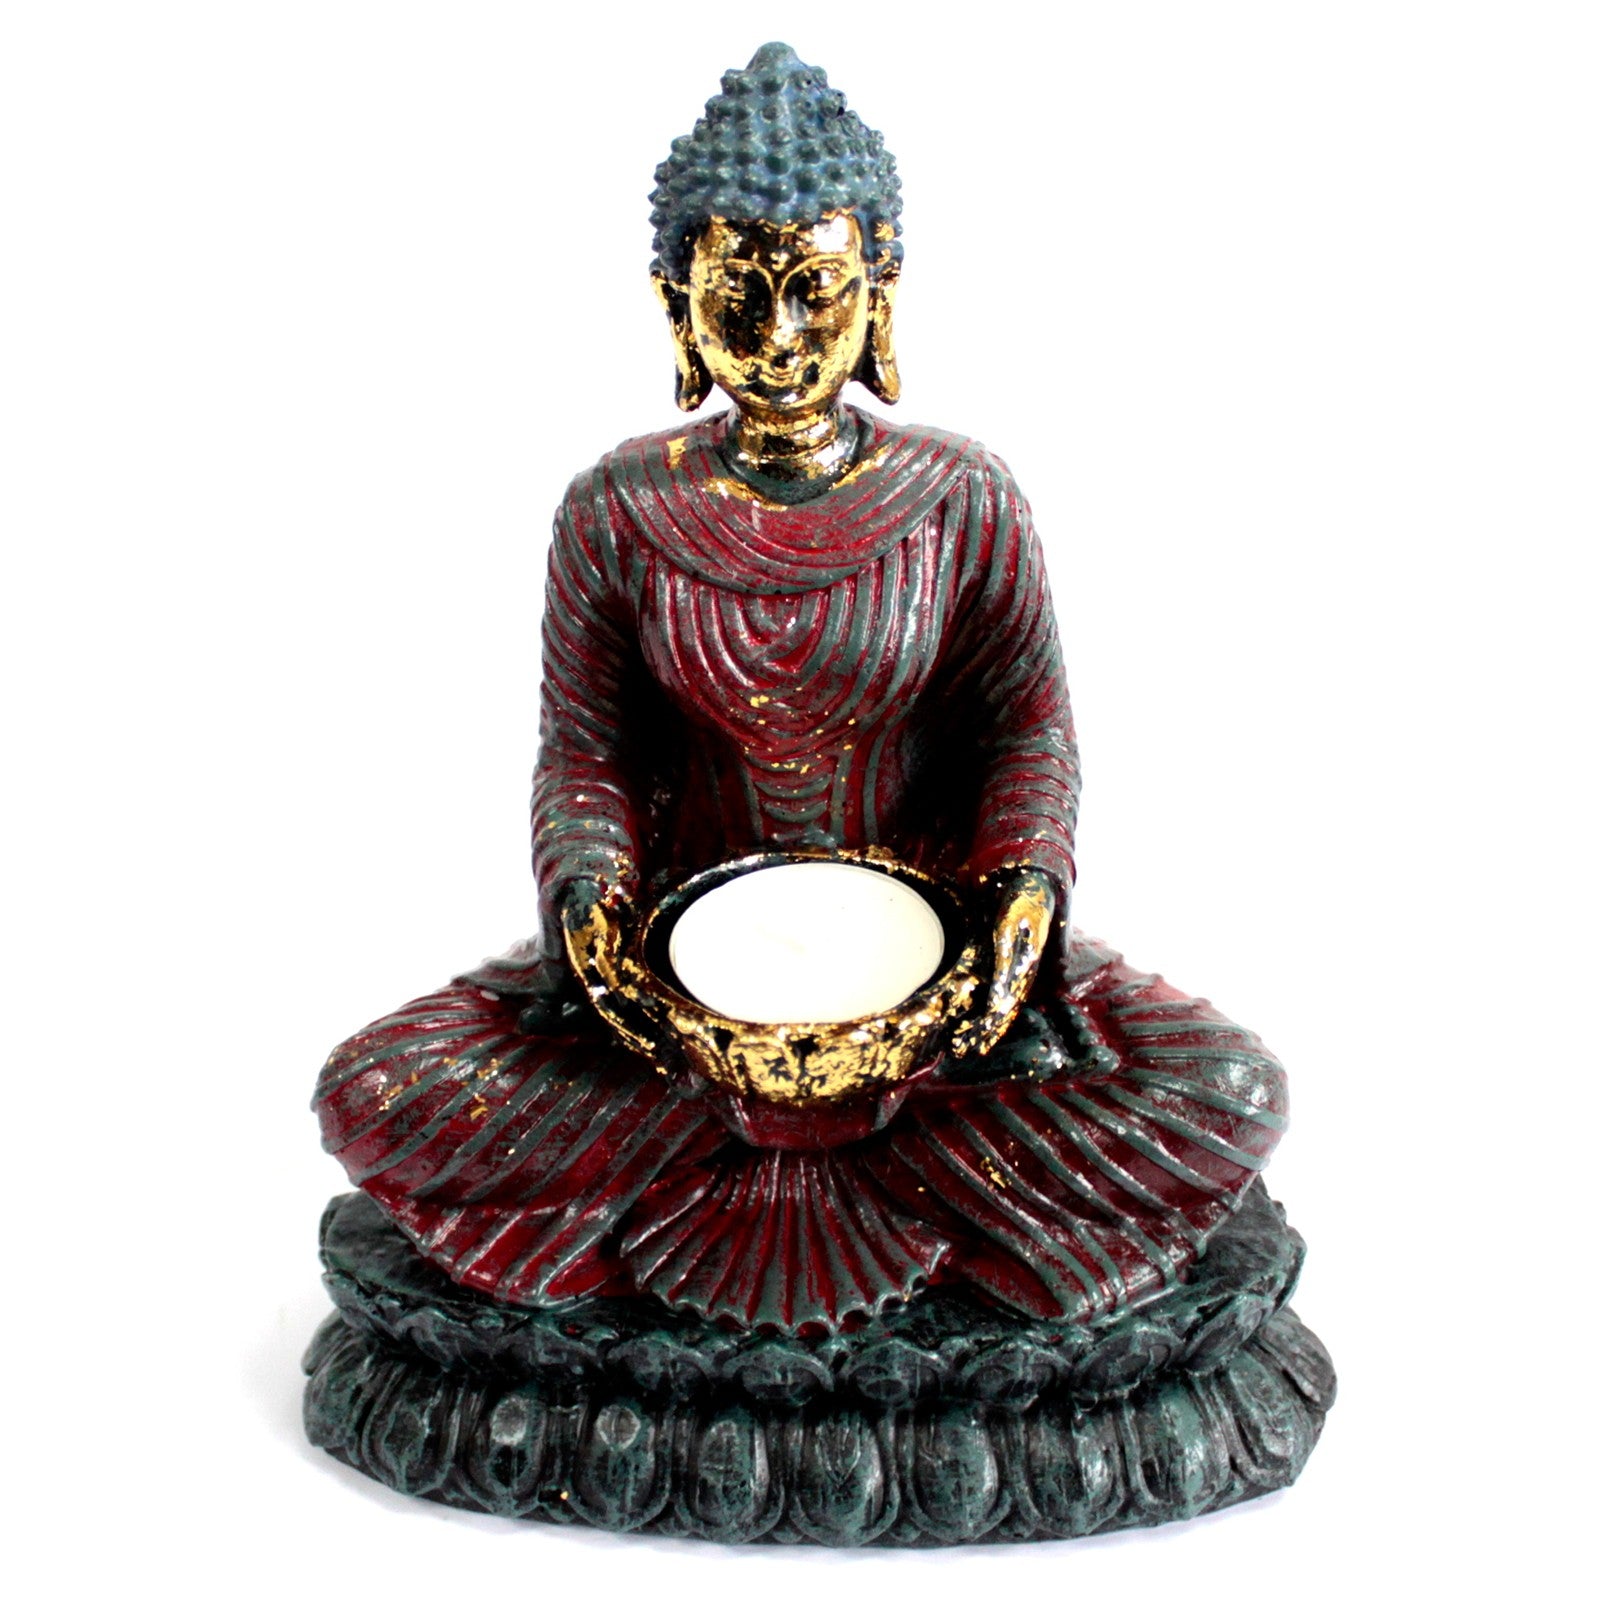 View Antique Buddha Devotee Candle Holder information